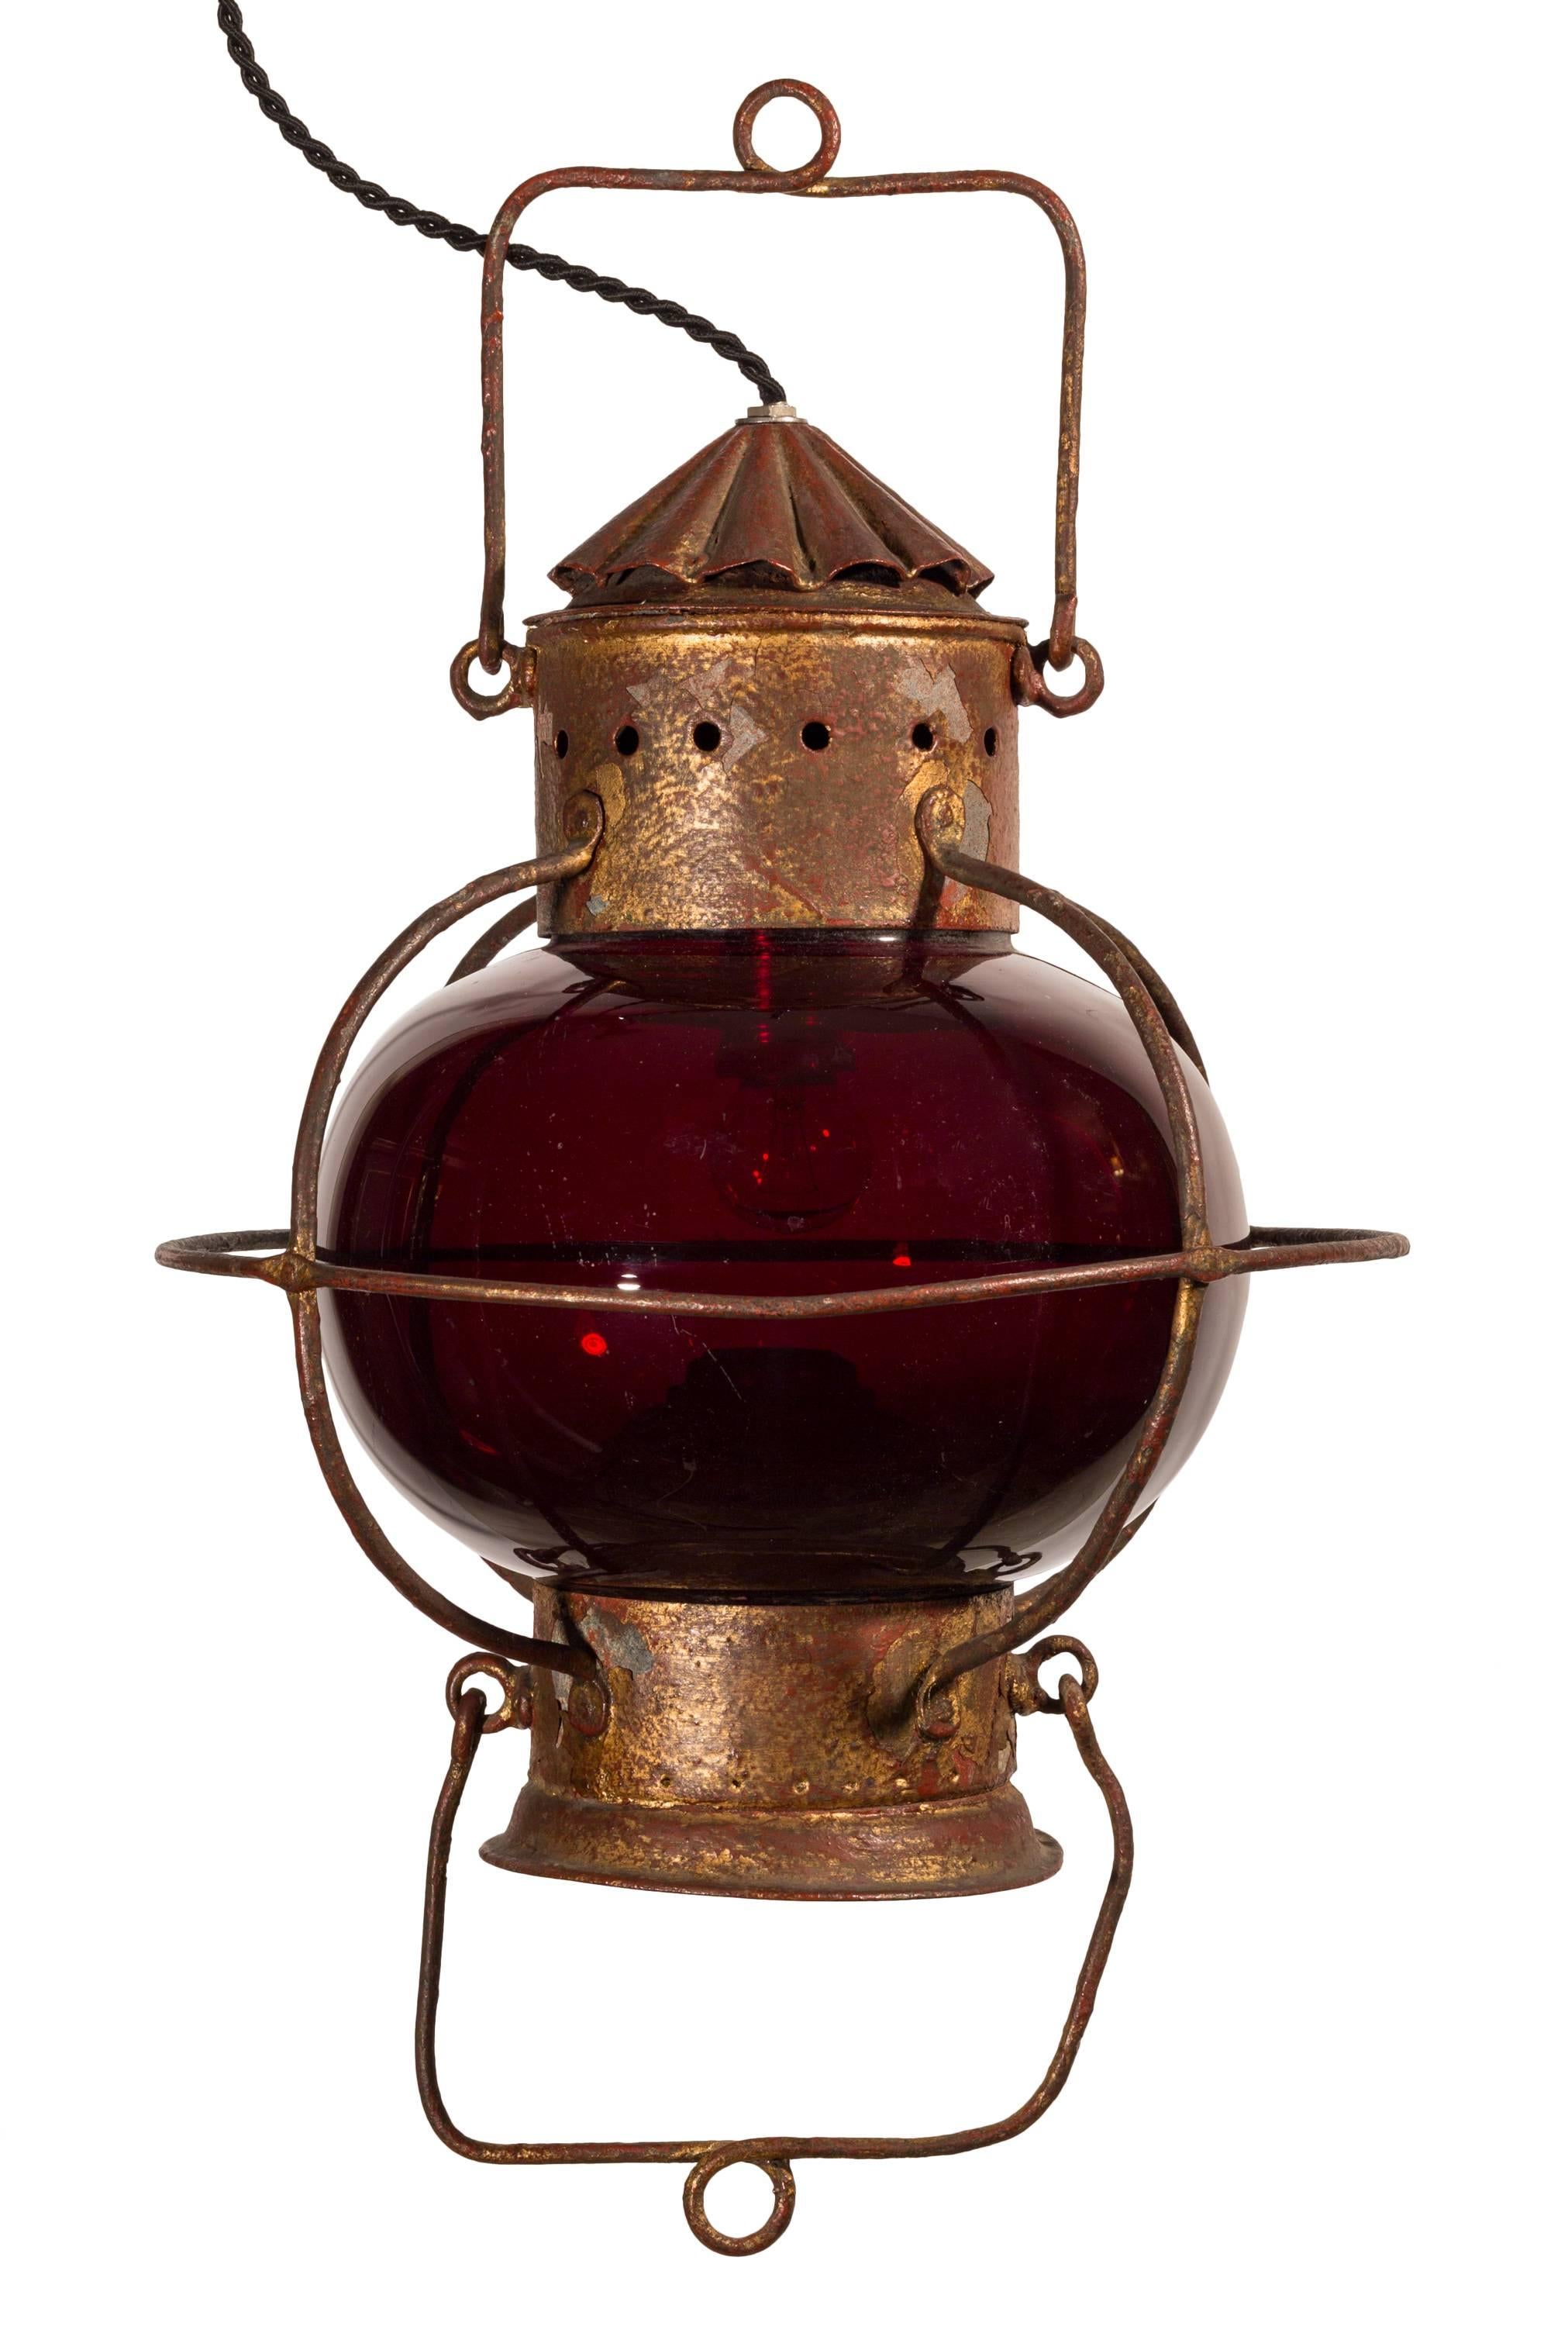 Unmatched pair of late 19th century nautical oil lamps with pristine red globes.
Similar in size and shape, these two lamps originally used a kerosene or oil flame for illumination, and the reservoir and wick assembly are included.
Both have been